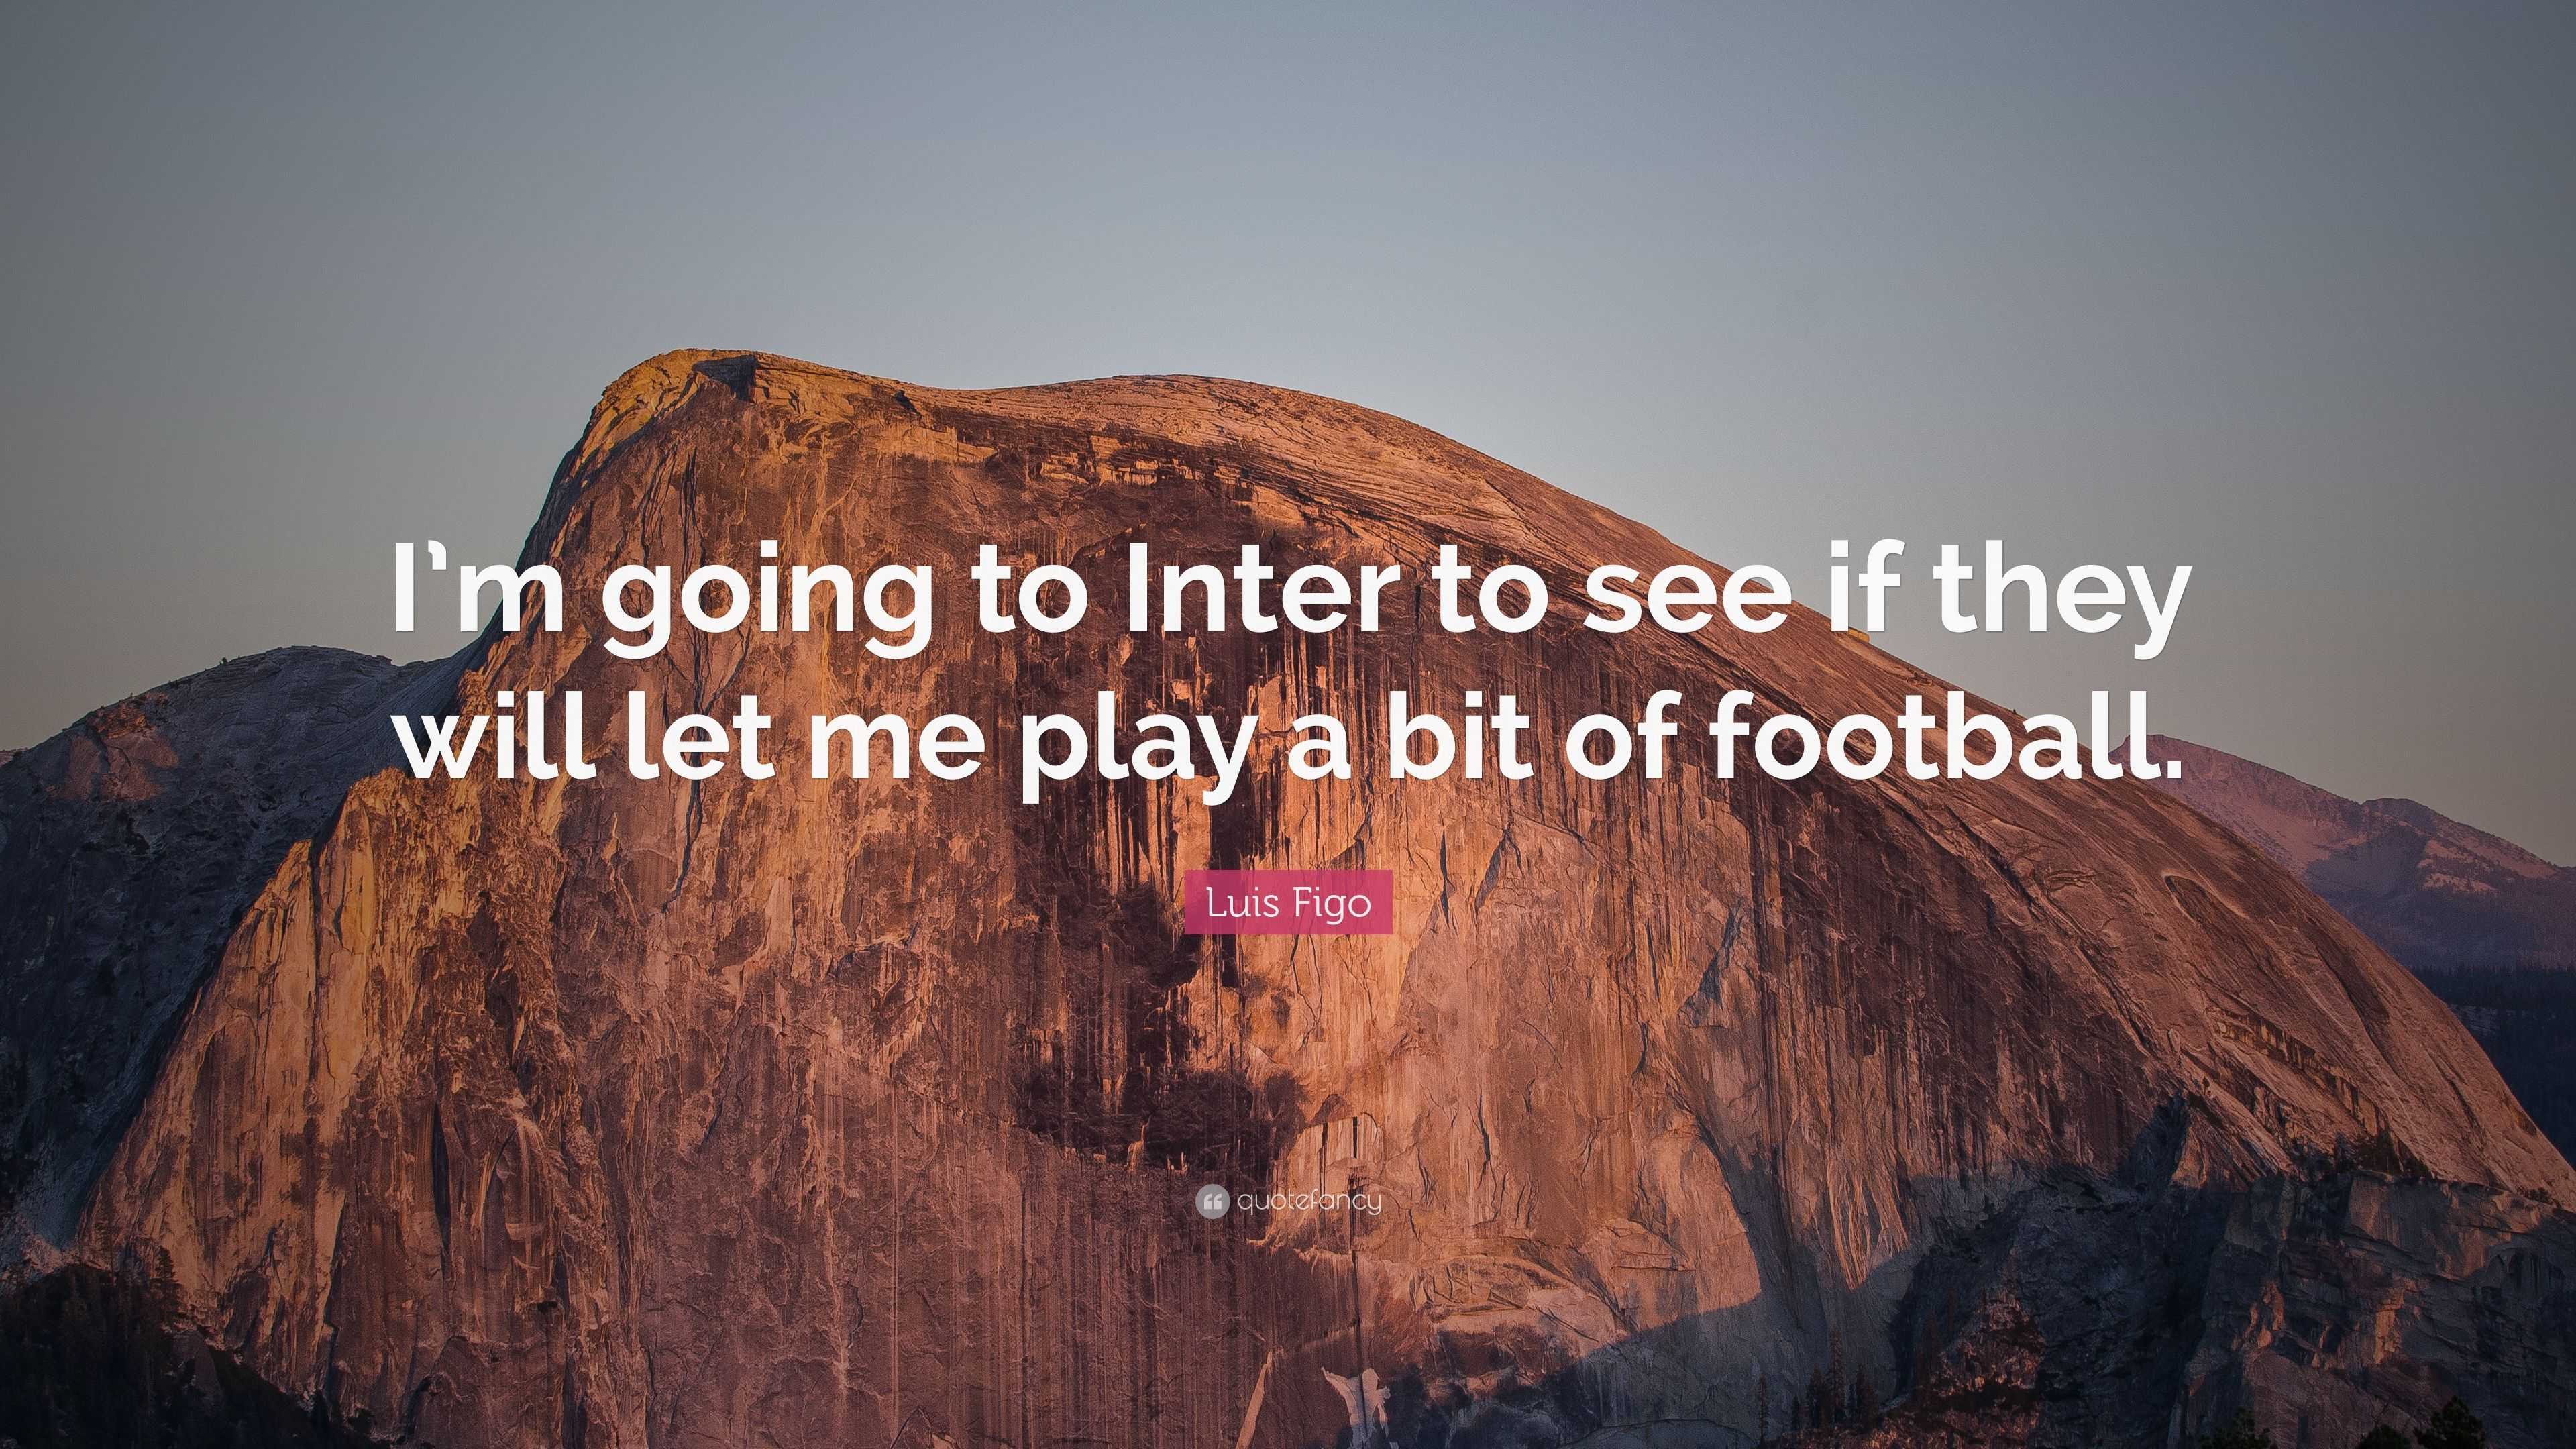 Luis Figo Quote: “I'm going to Inter to see if they will let me play